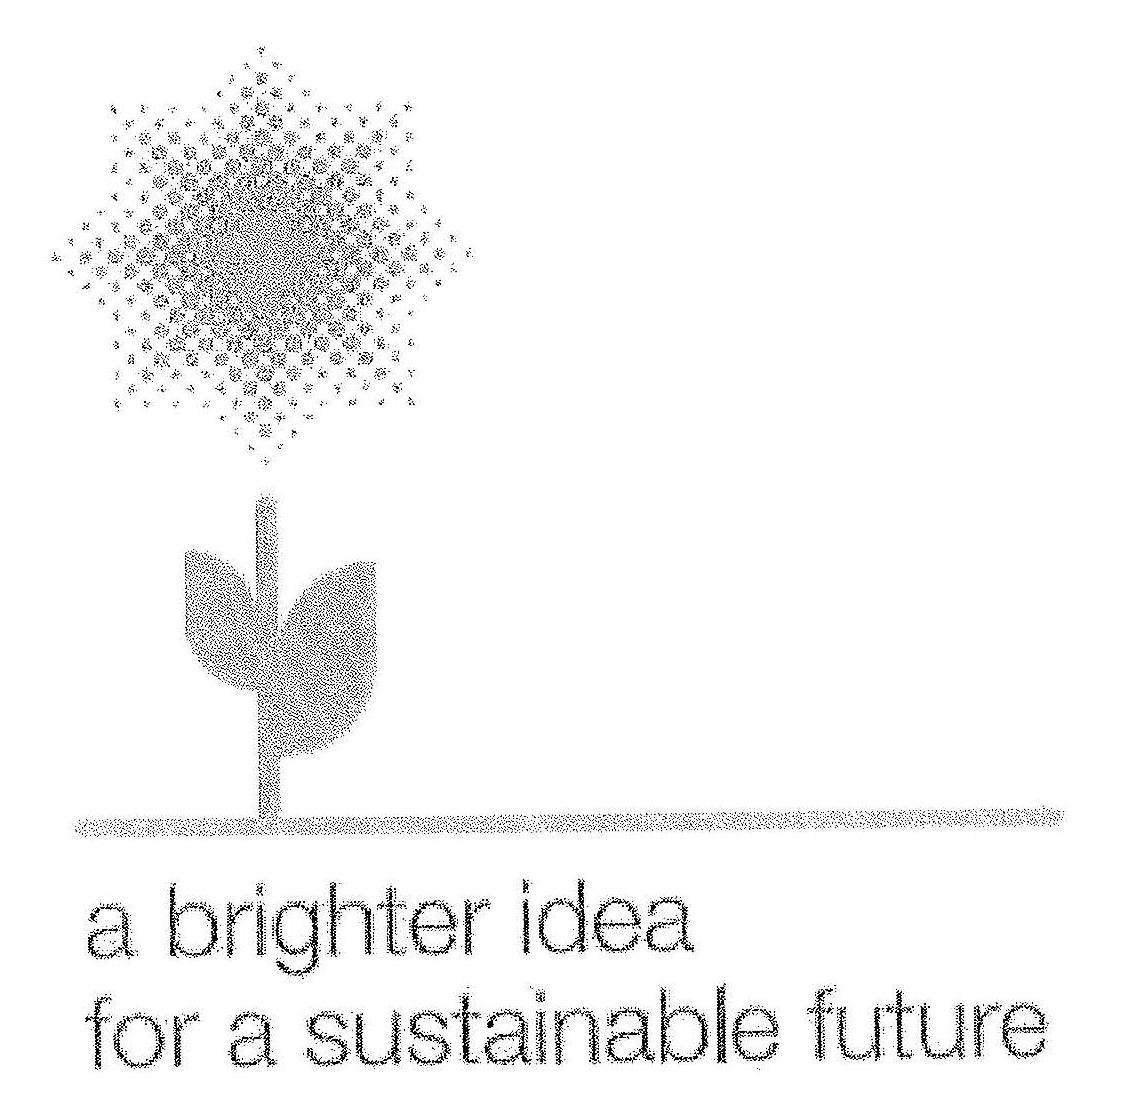 A BRIGHTER IDEA FOR A SUSTAINABLE FUTURE